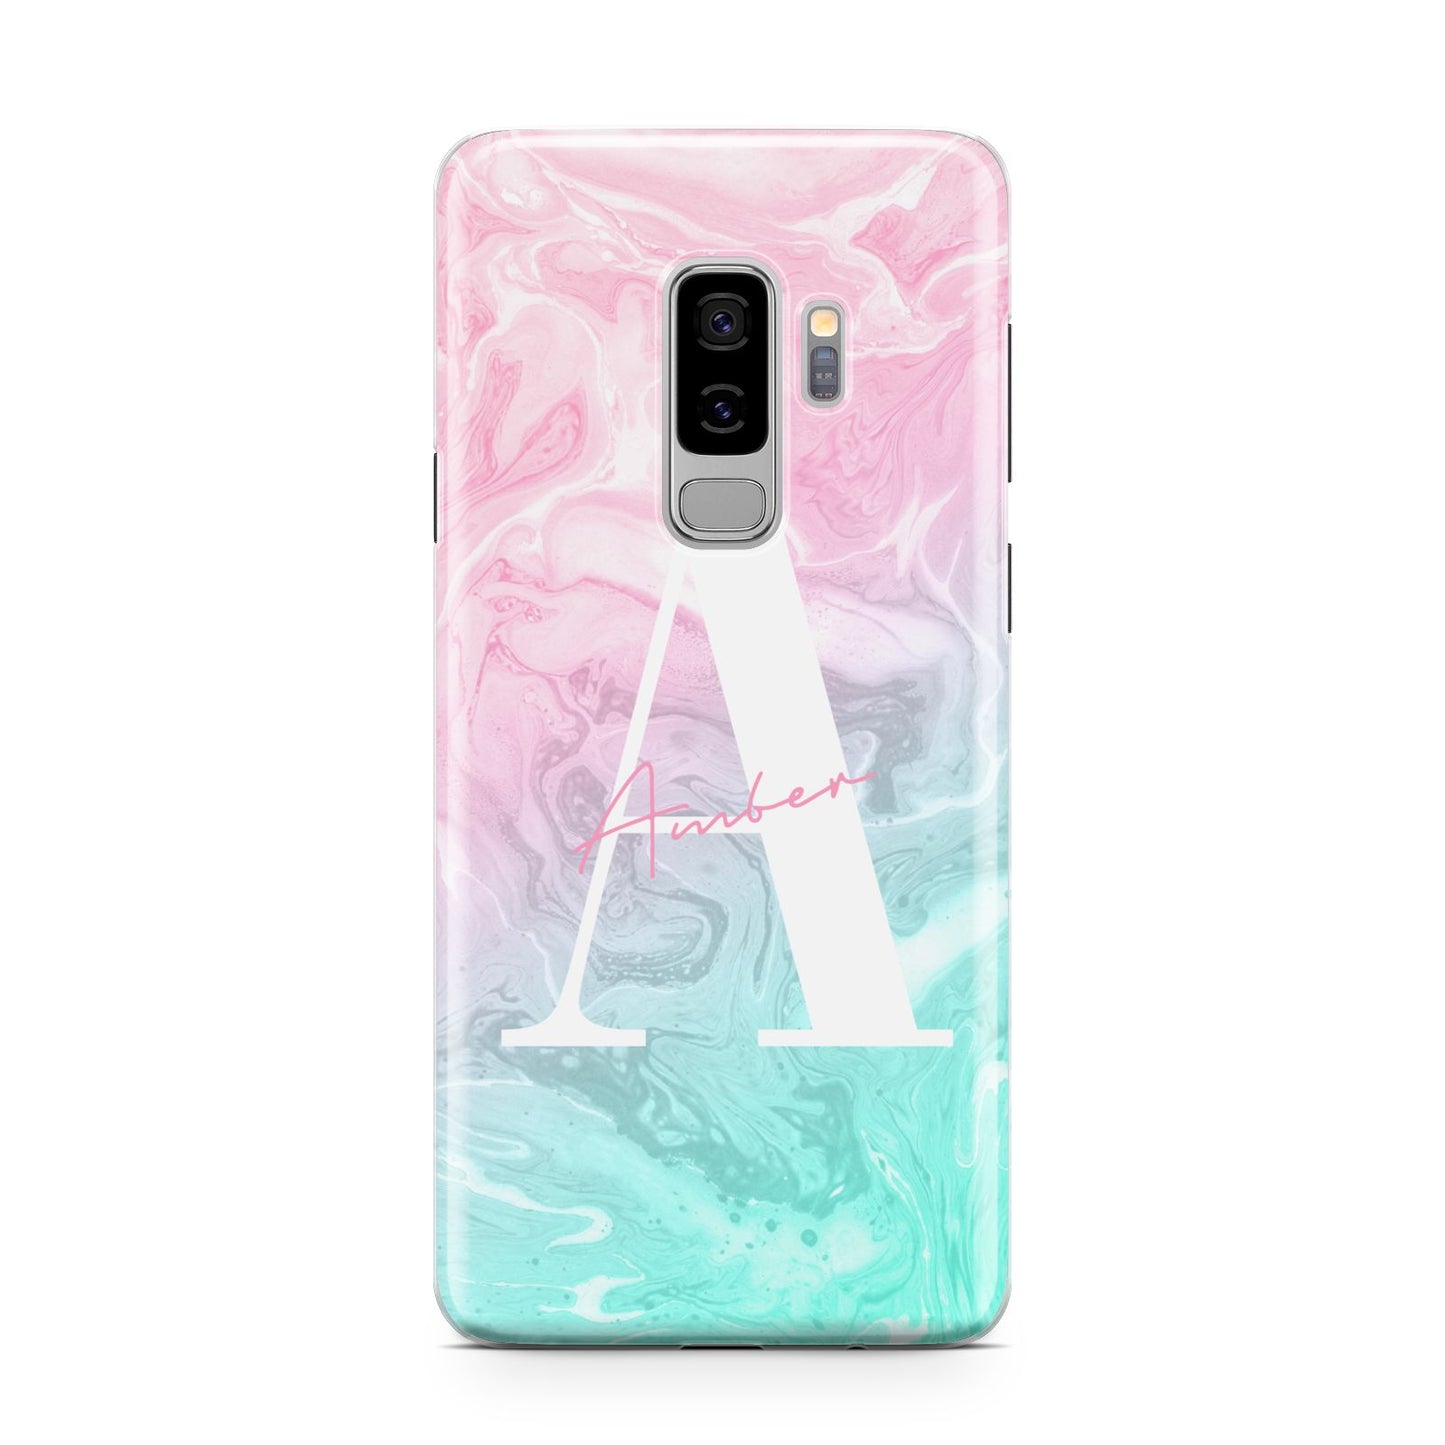 Monogrammed Pink Turquoise Pastel Marble Samsung Galaxy S9 Plus Case on Silver phone